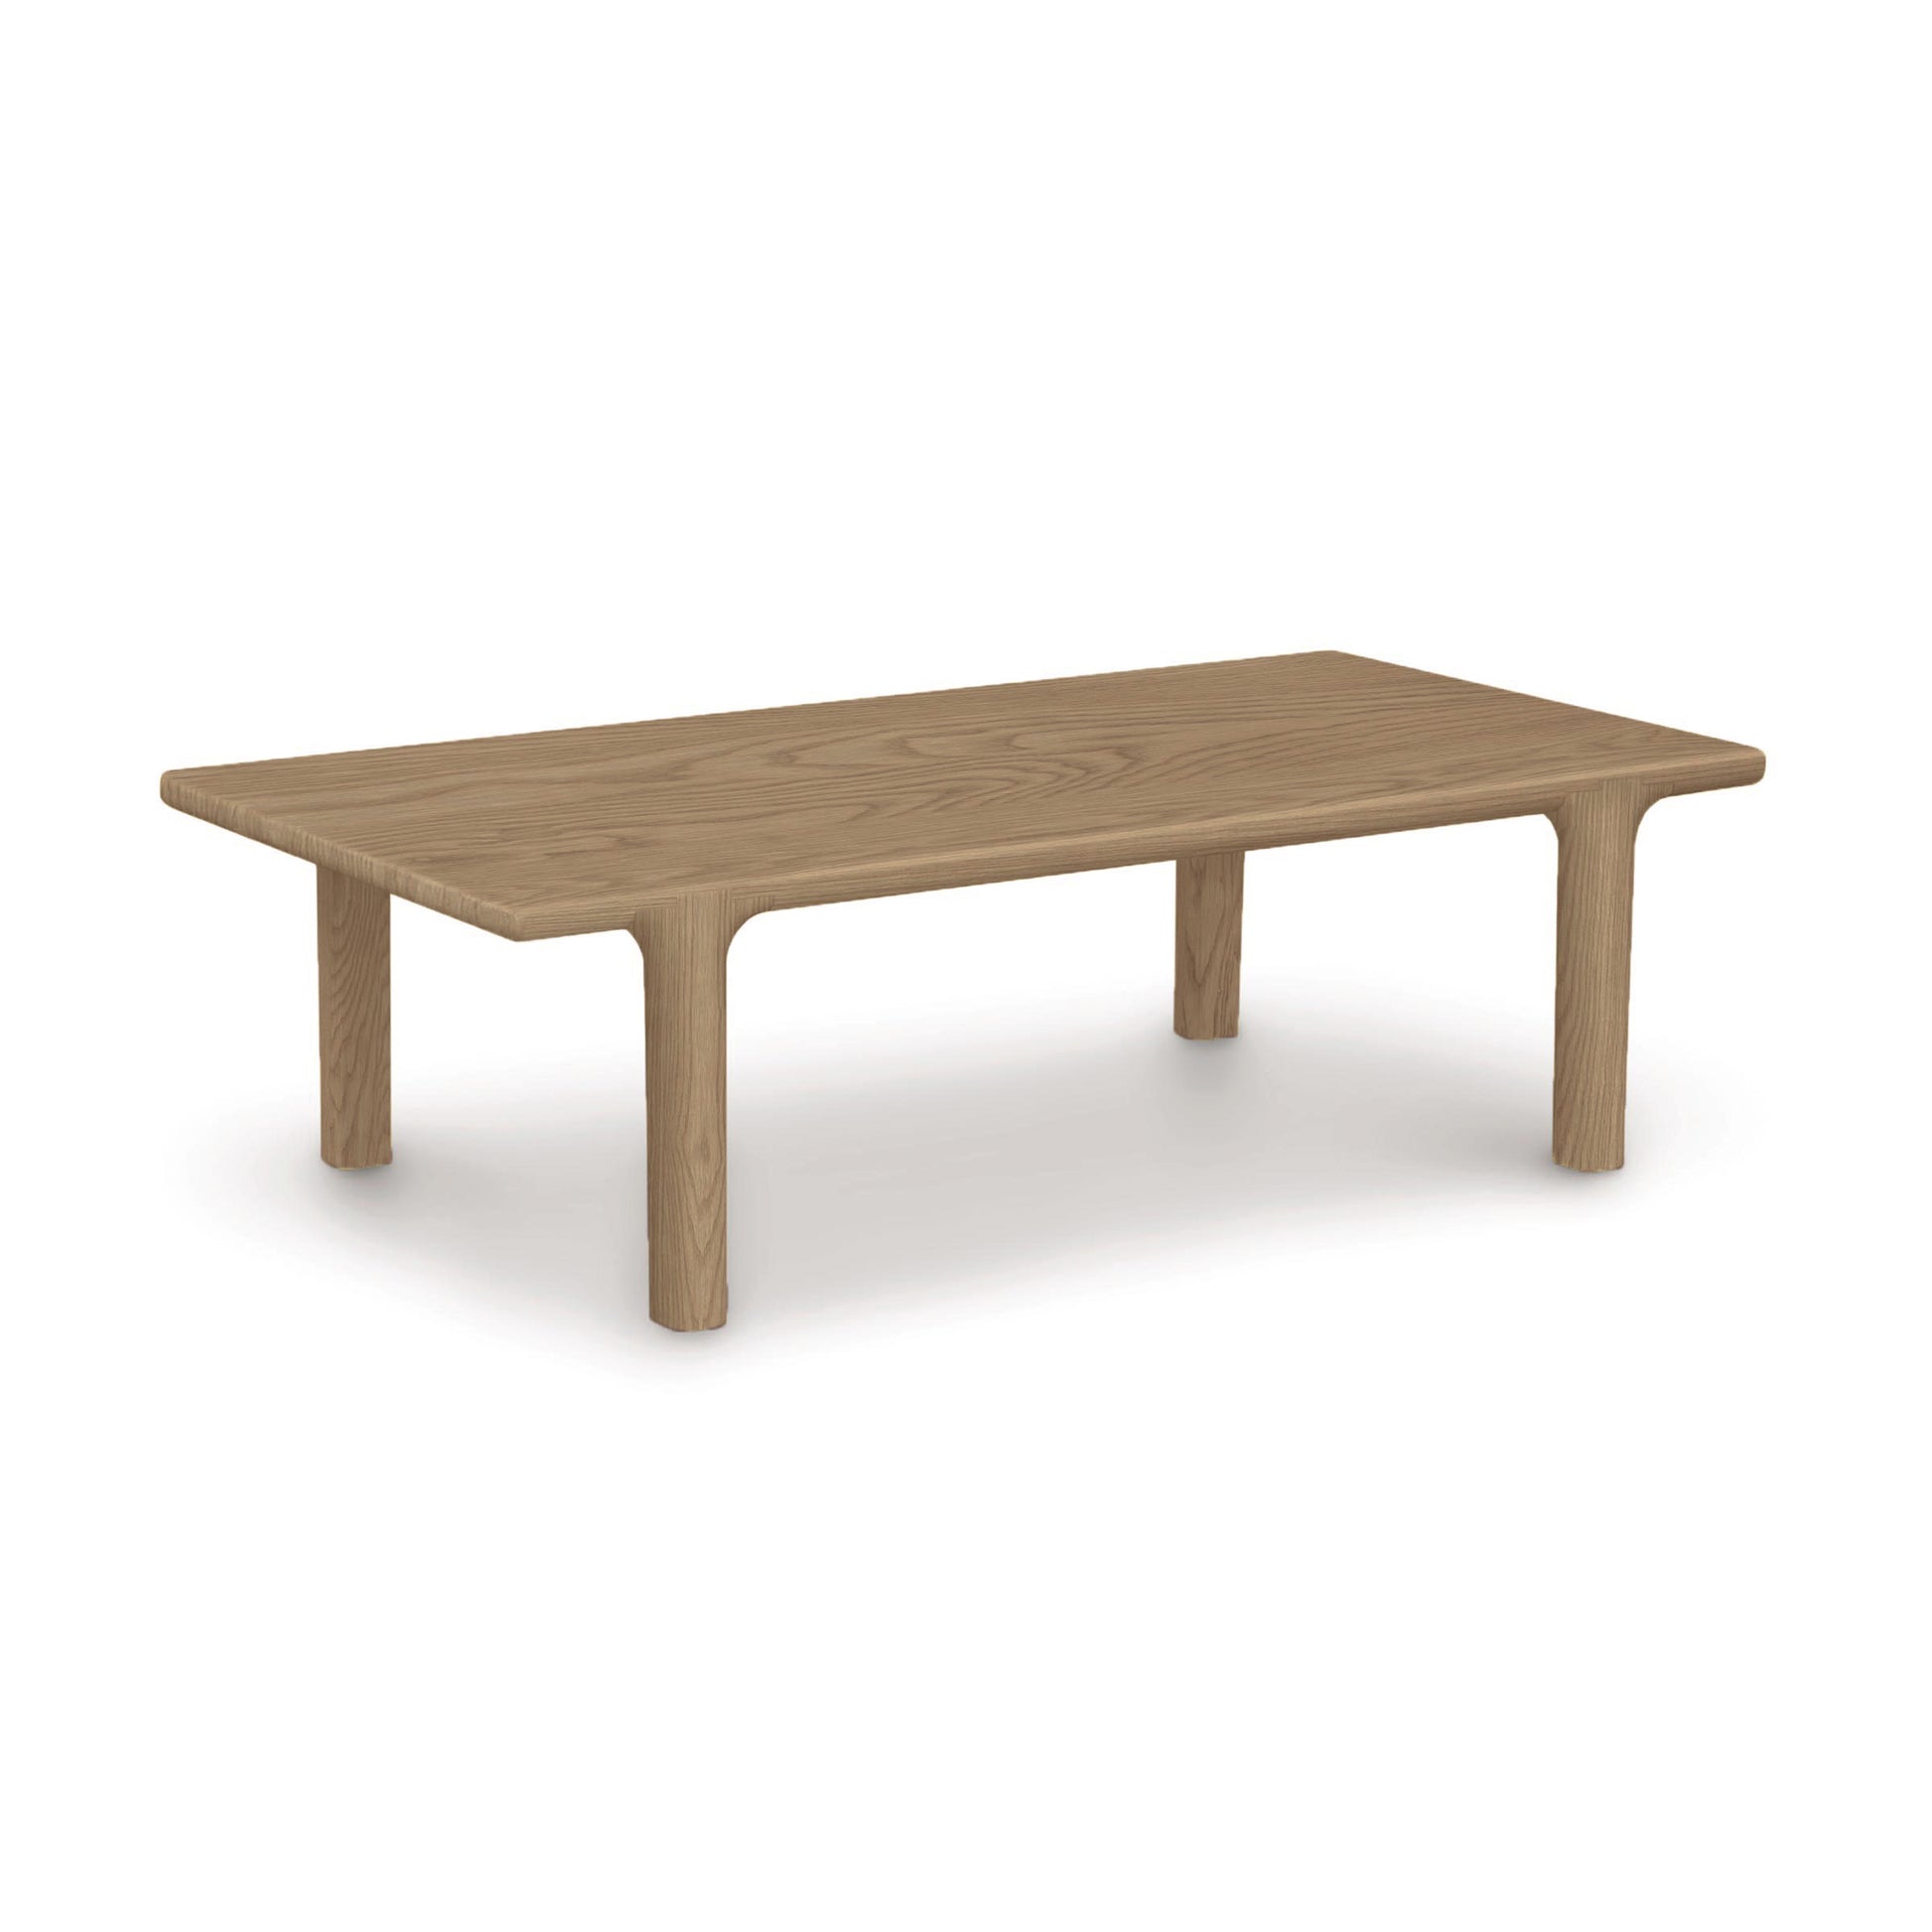 A simple Copeland Furniture Sierra Rectangular Coffee Table with a rectangular top and four legs, crafted from solid North American hardwood, displayed on a white background.